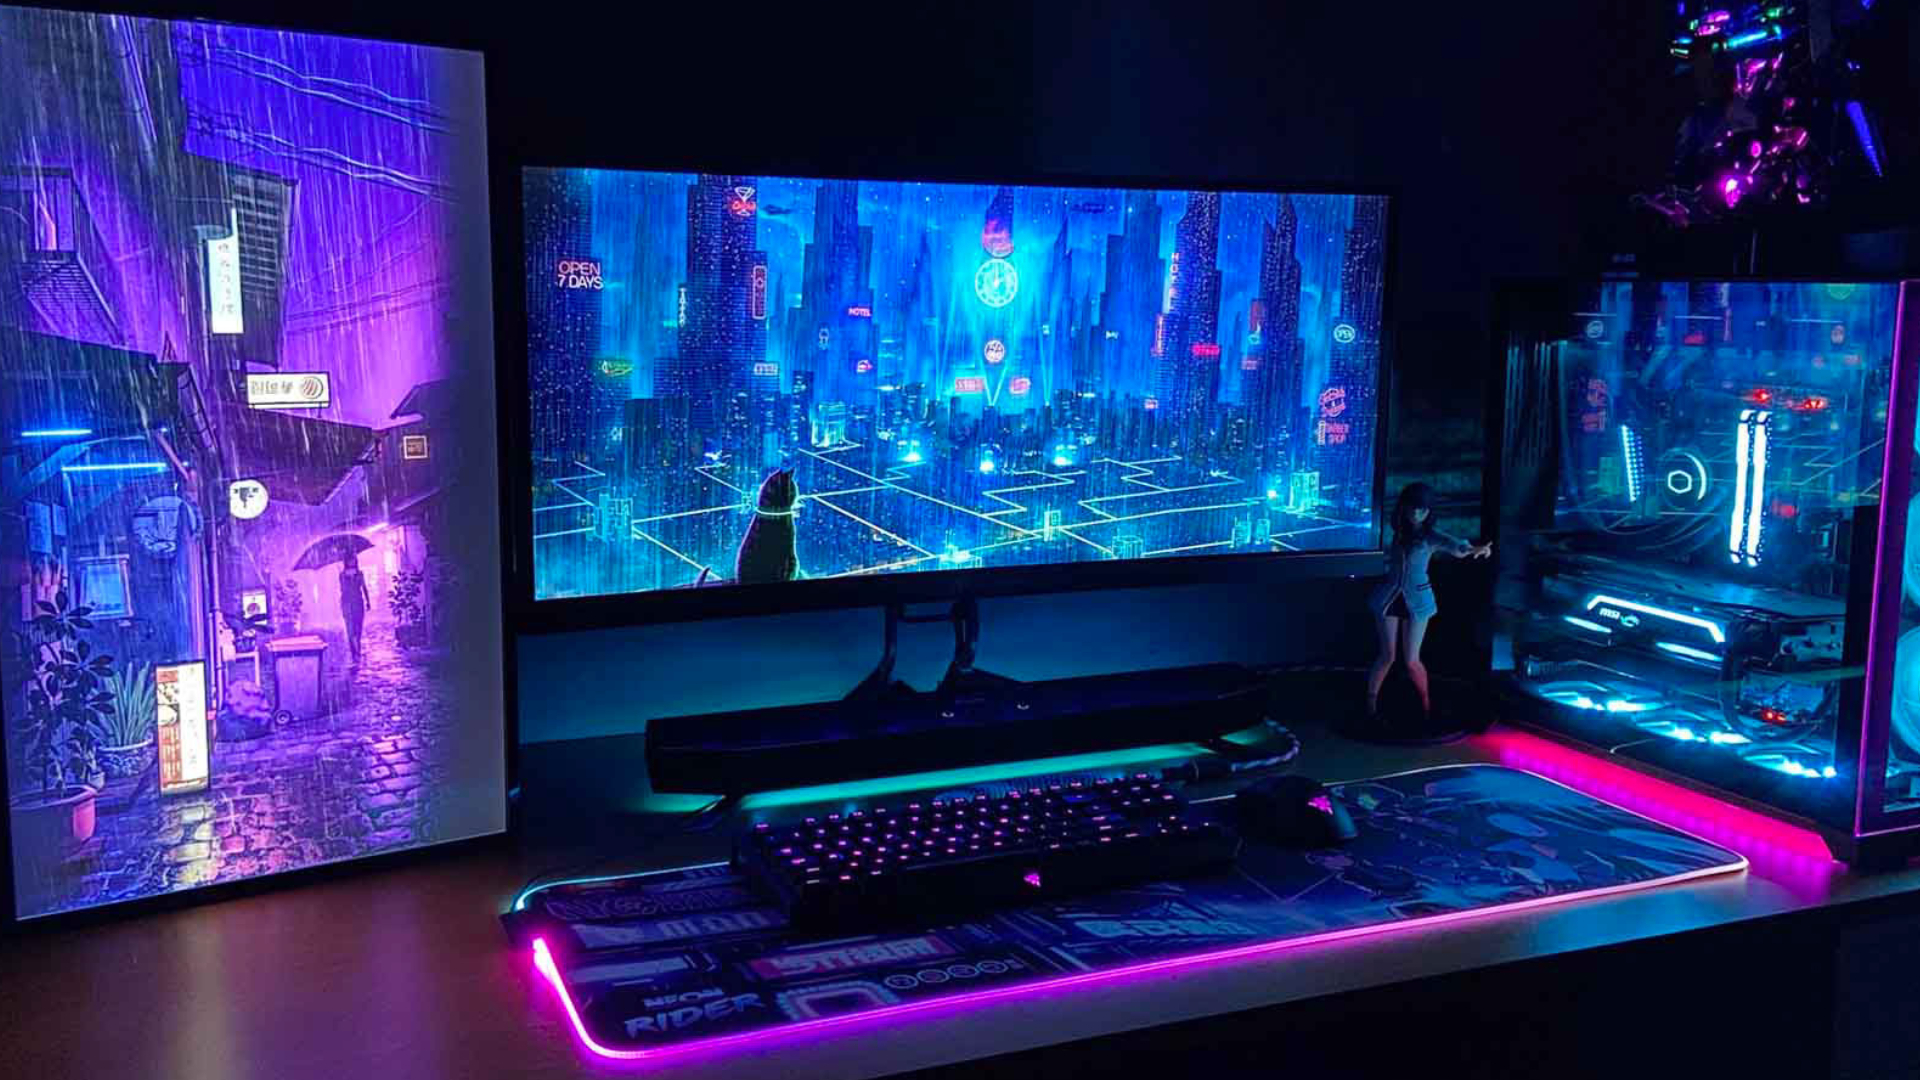 The perfect gadgets for any PC gamer